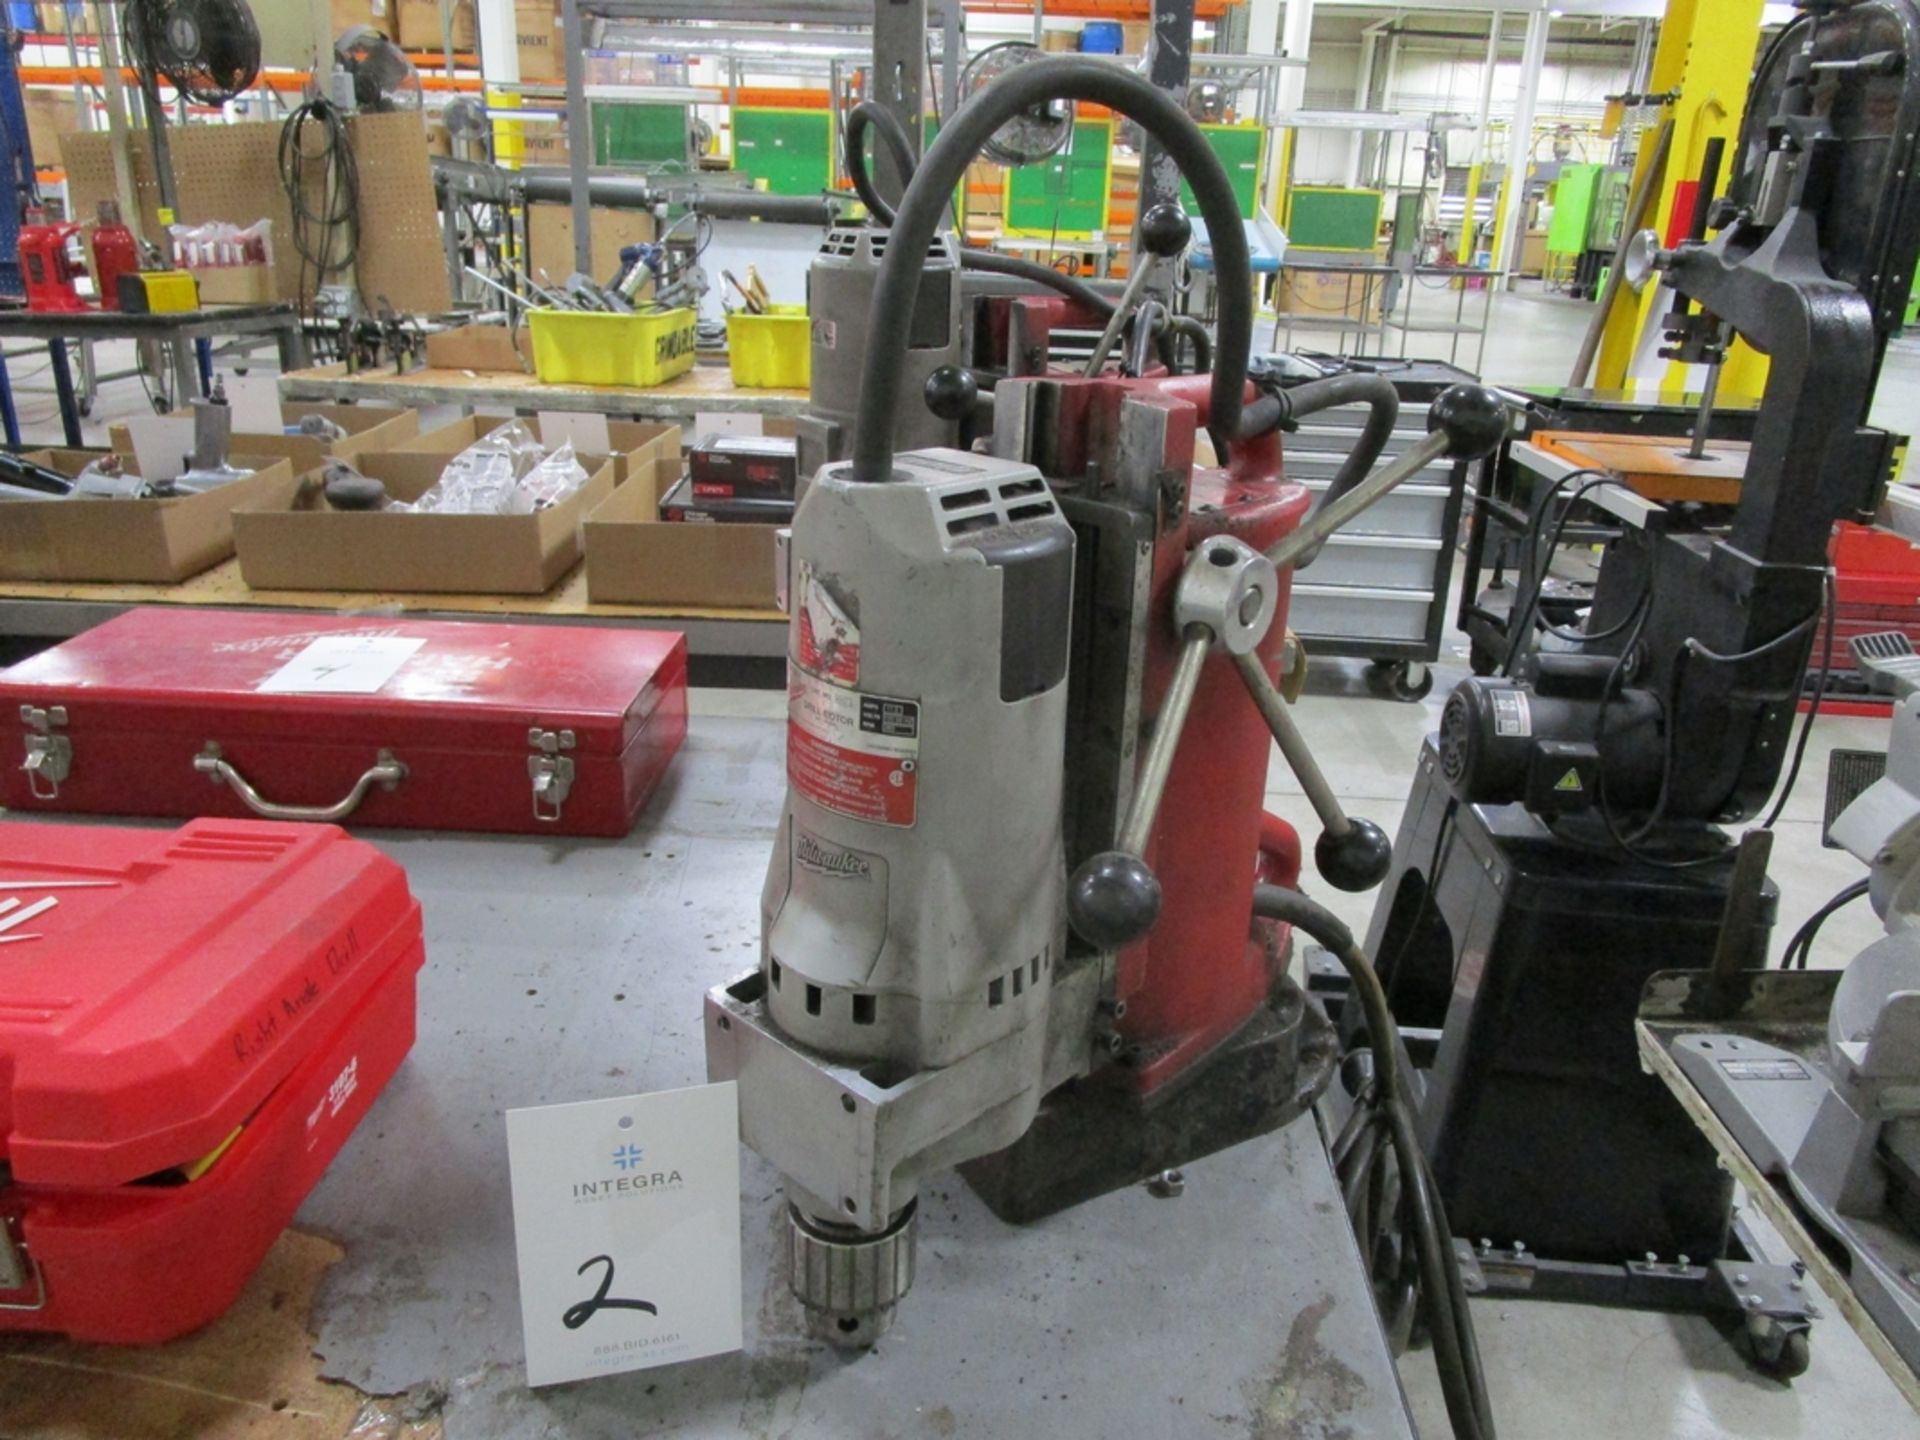 Milwaukee 4262-1 3/4"" Magnetic Base Drill Press